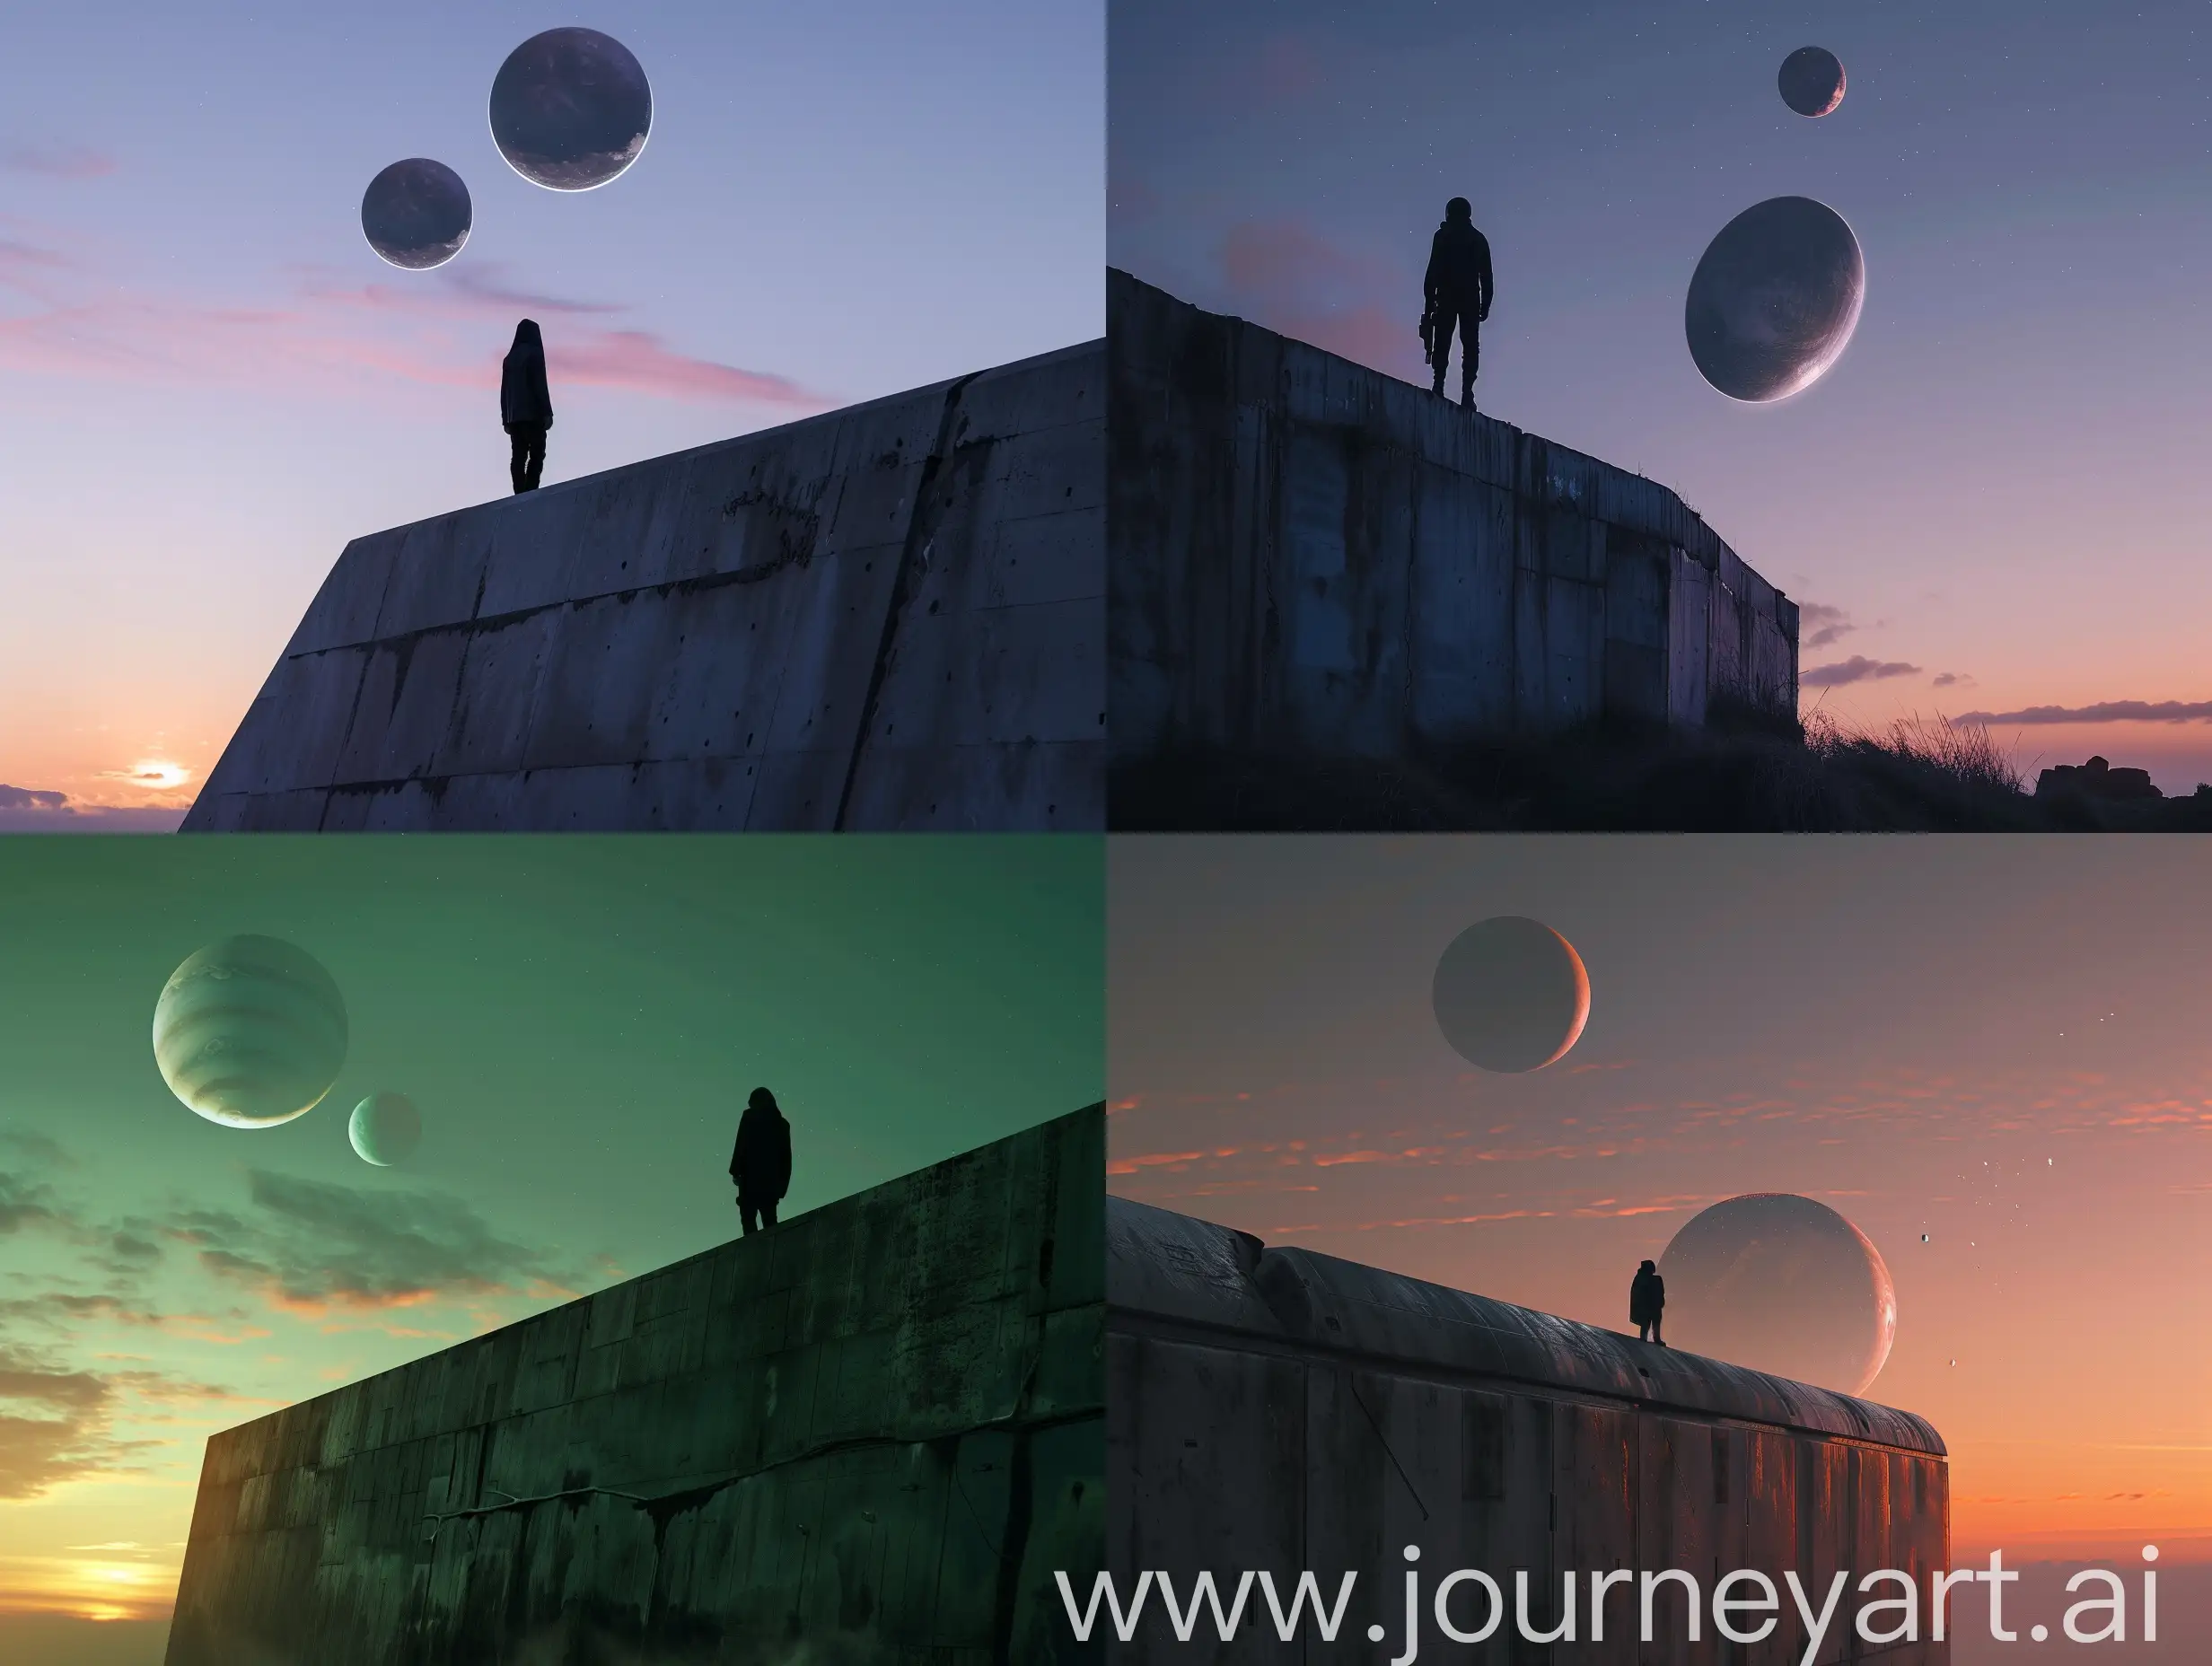 cinematic, beautiful style, dusk evening, shot from bottom to top, sci fi wall,  person in dark stands on it, in the background sky with two planets, utopia